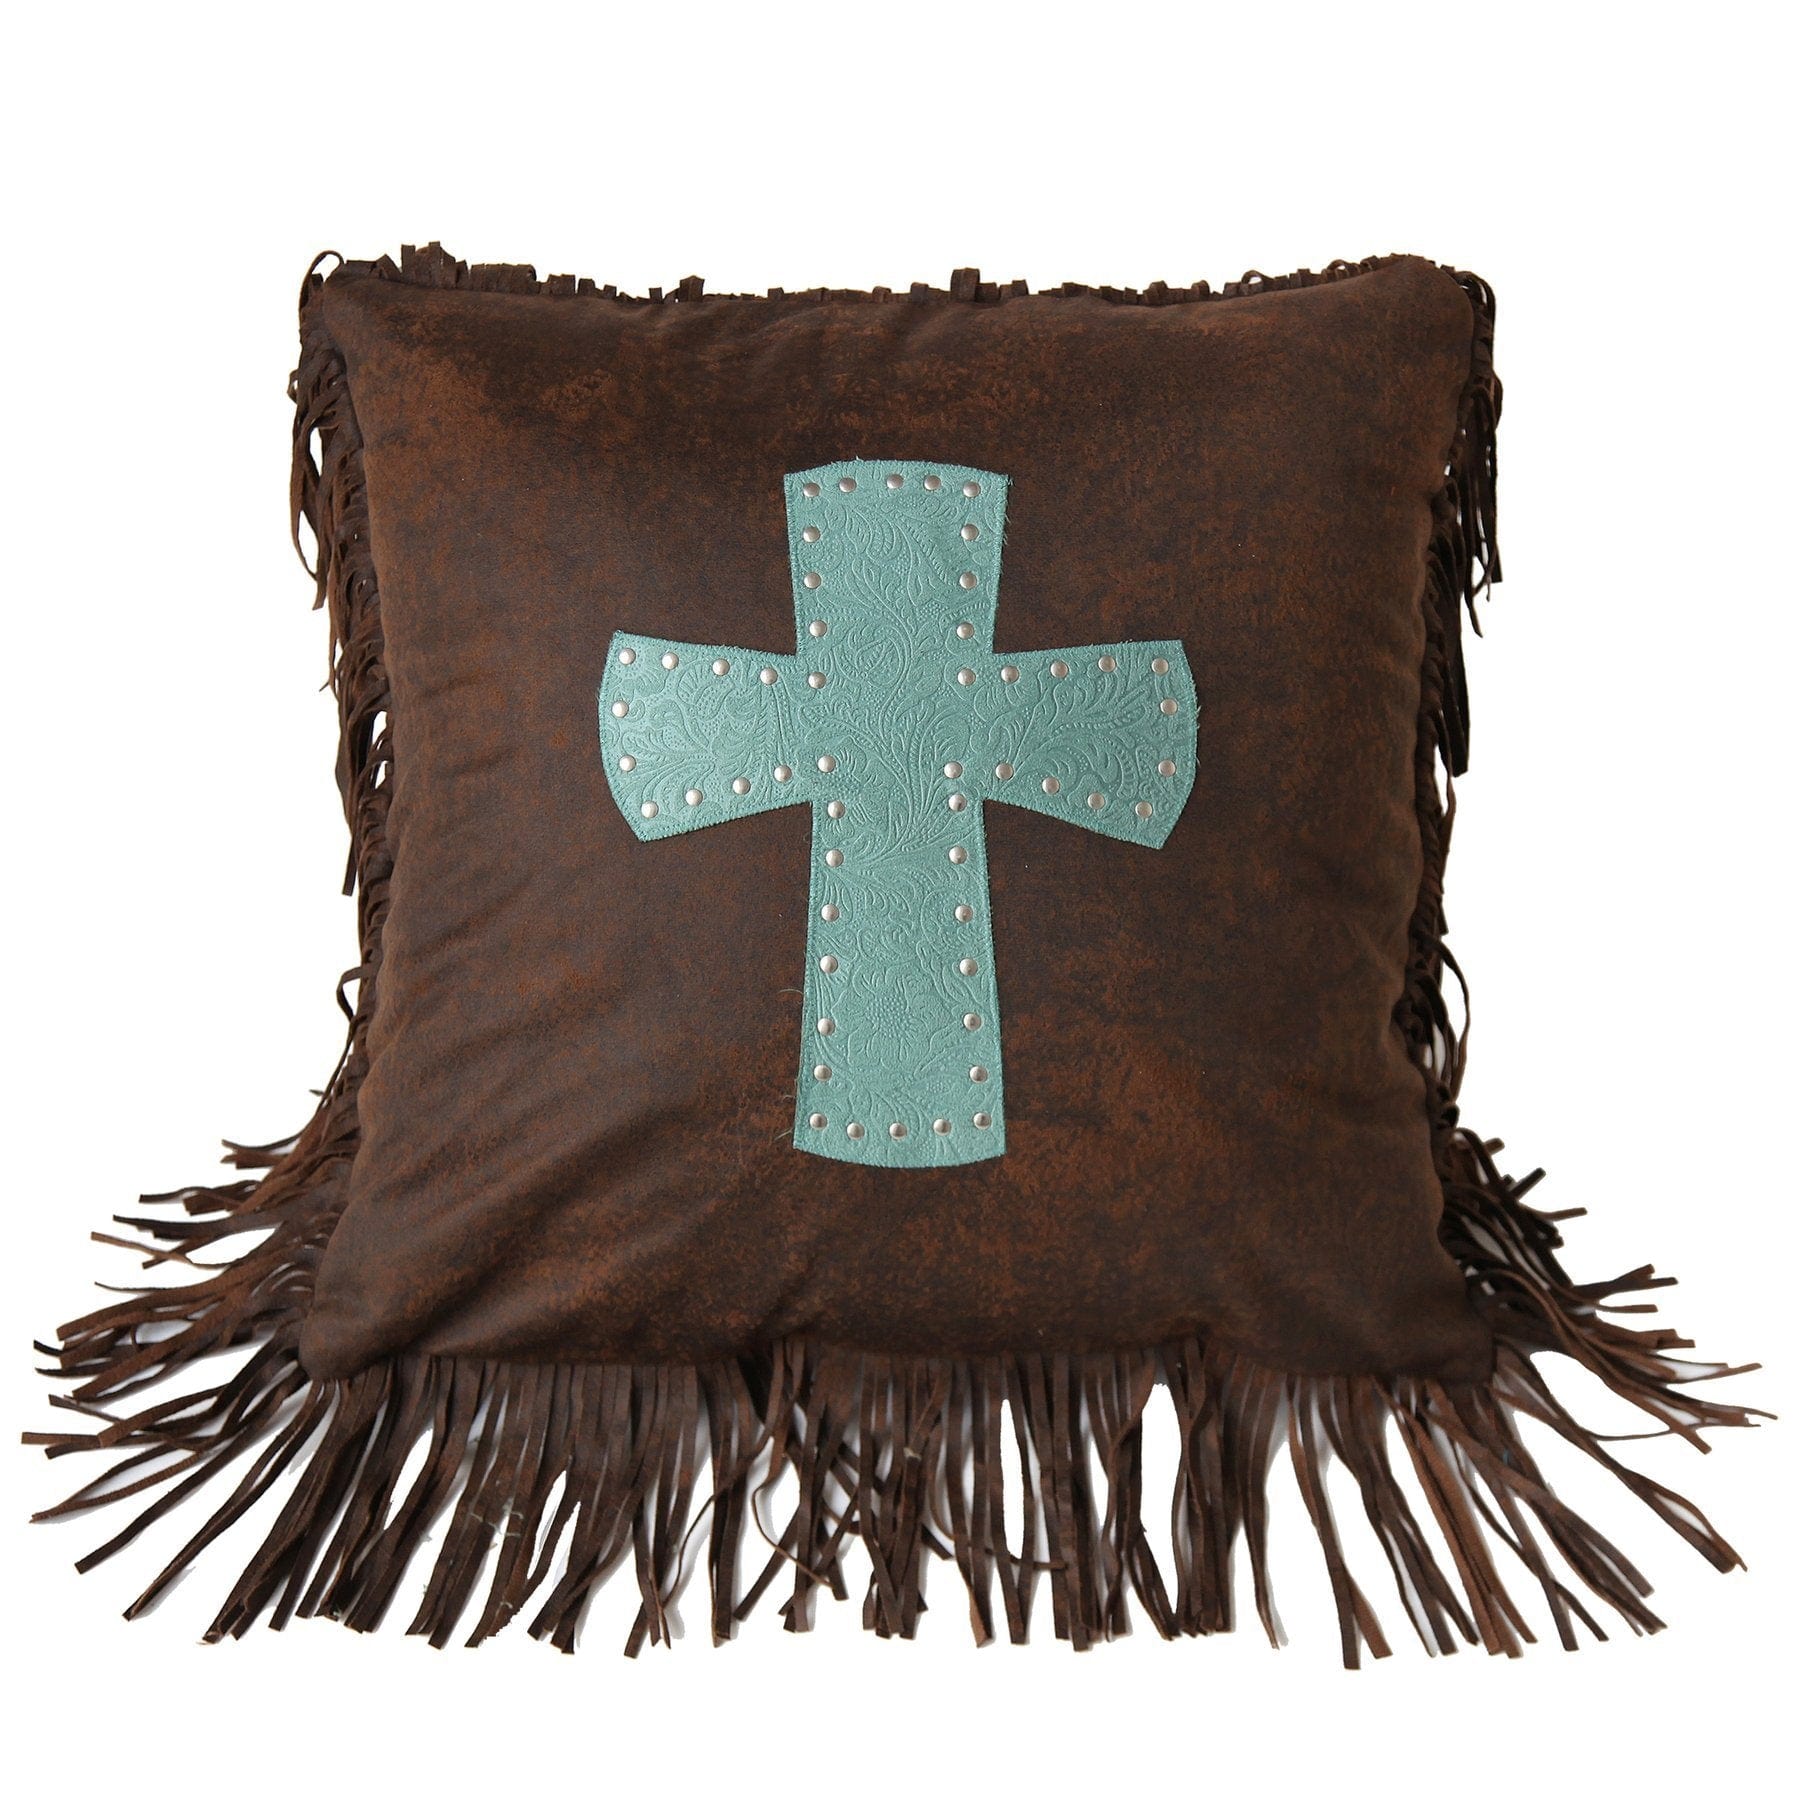 Cheyenne Tooled Leather Cross Throw Pillow, 2 Colors Turquoise Pillow